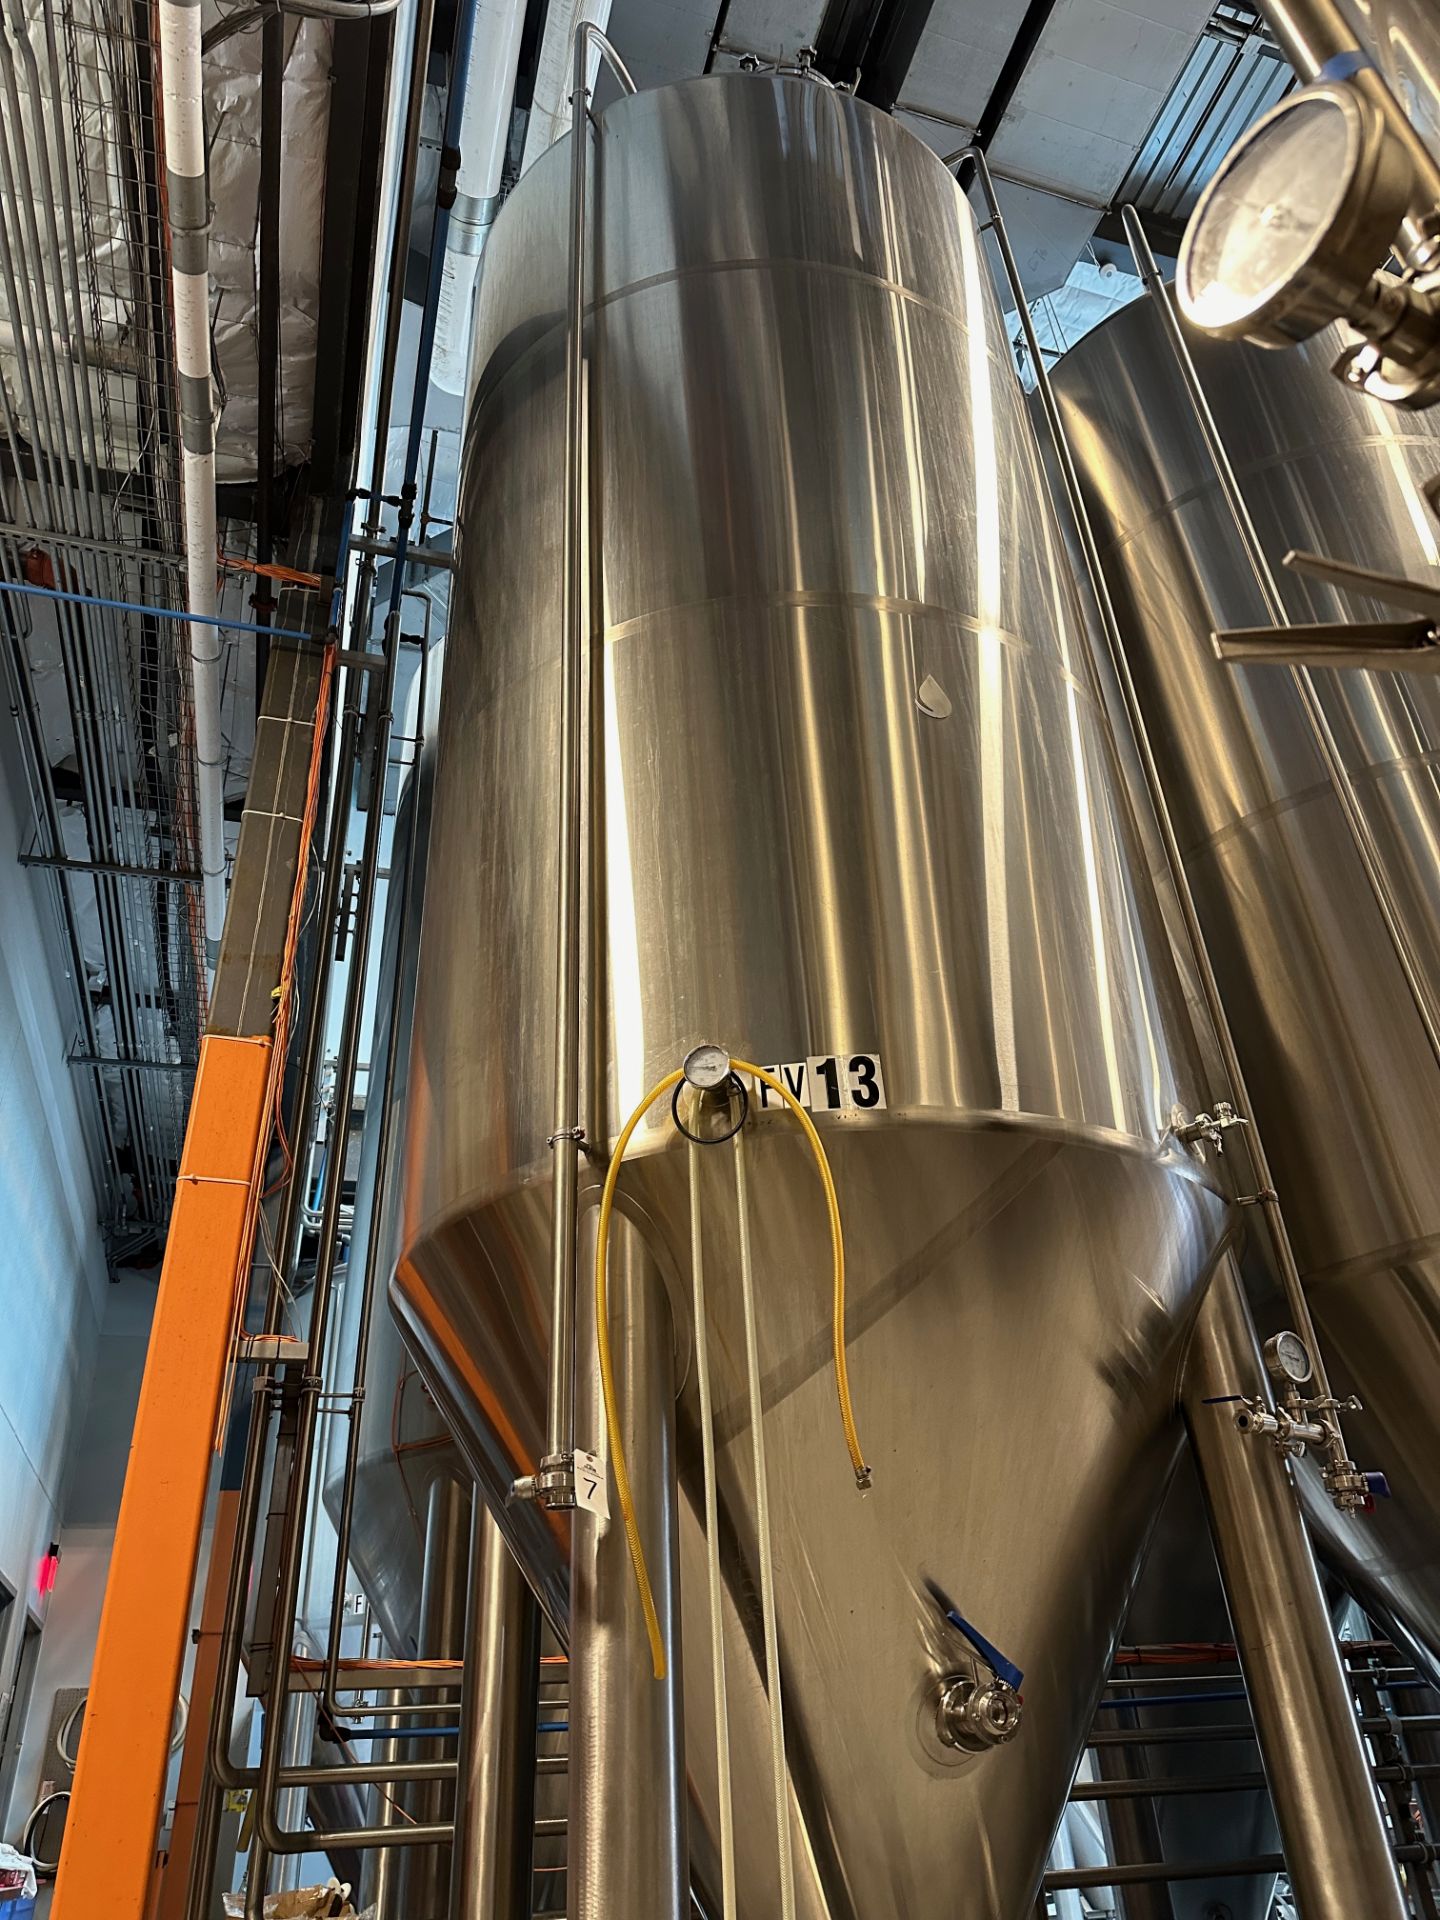 Complete 40 BBL Microbrewery - 40 BBL Deutsche 4-Vessel Brewhouse, Tanks, Can Line - See Description - Image 31 of 335